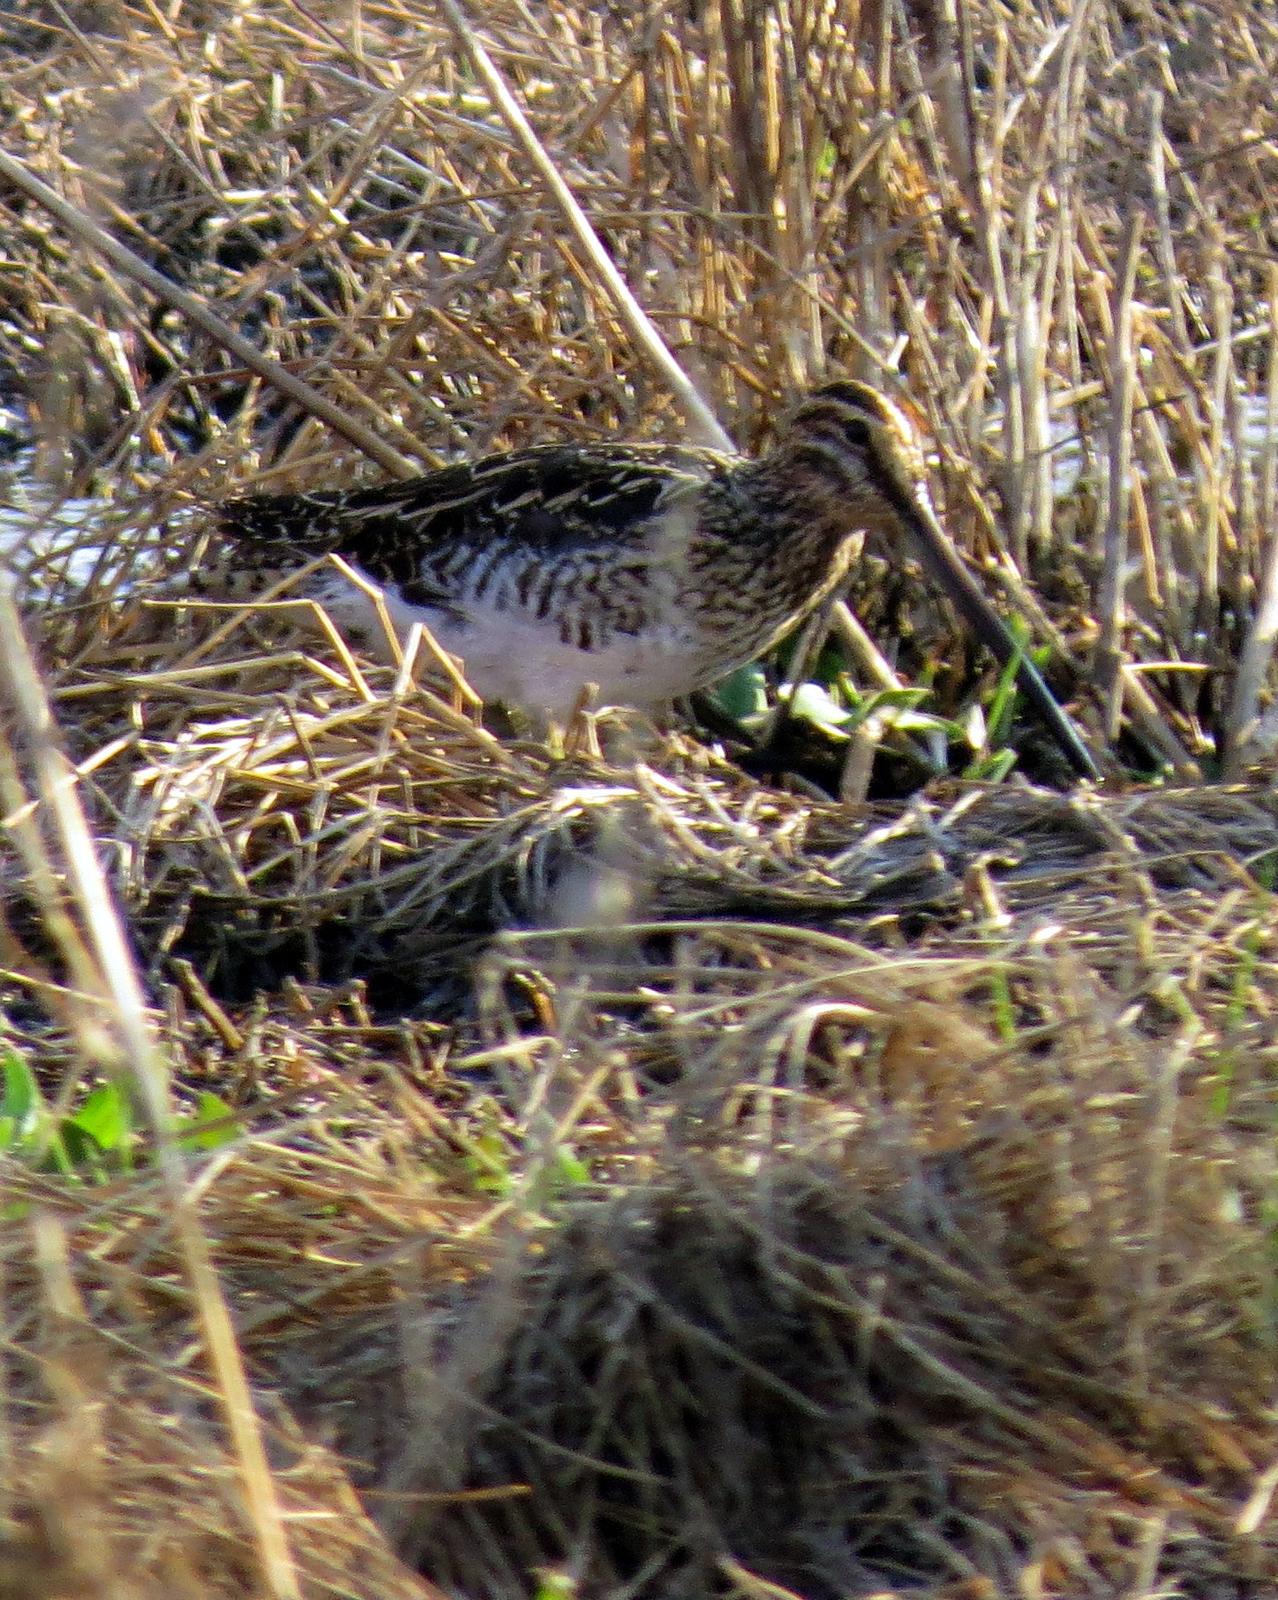 African Snipe Photo by Richard  Lowe